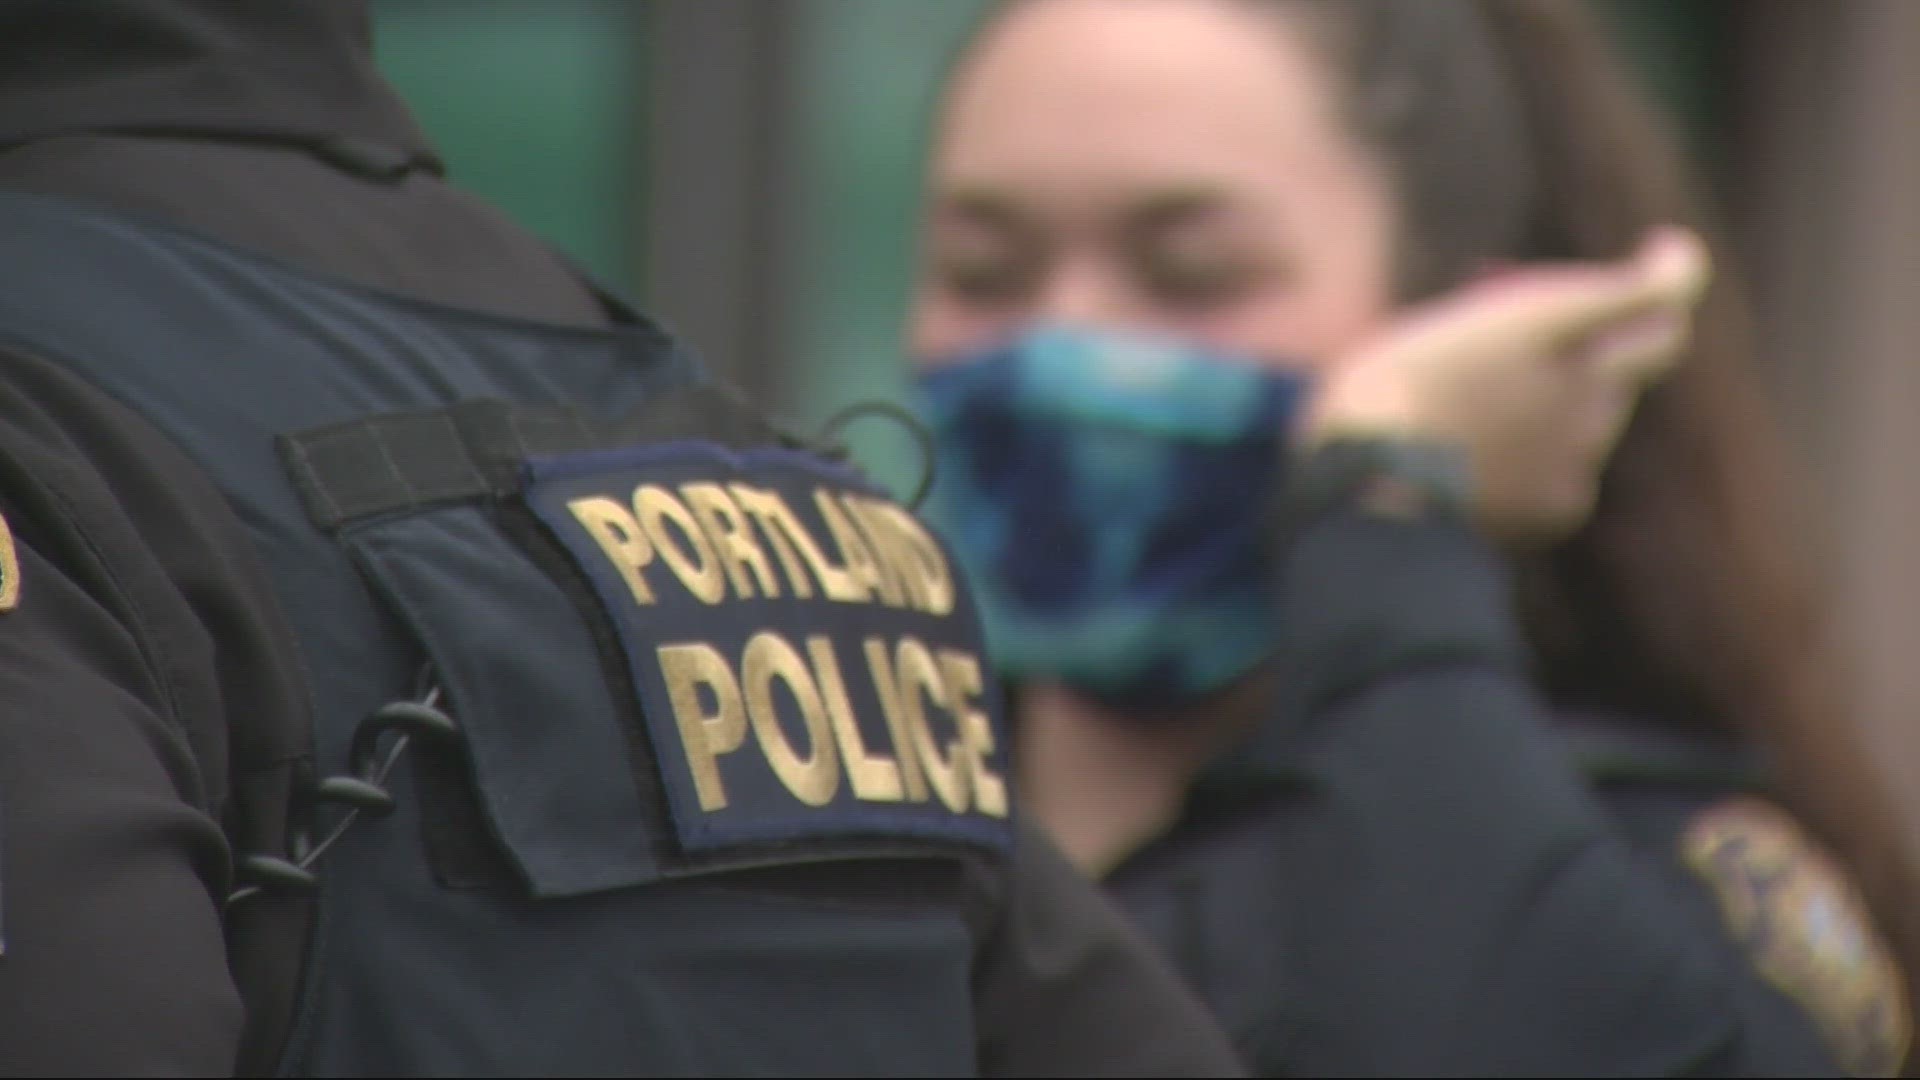 The safety and security task force recommended having police officers stationed near schools to help deter crime and allow them to respond quickly to violence.